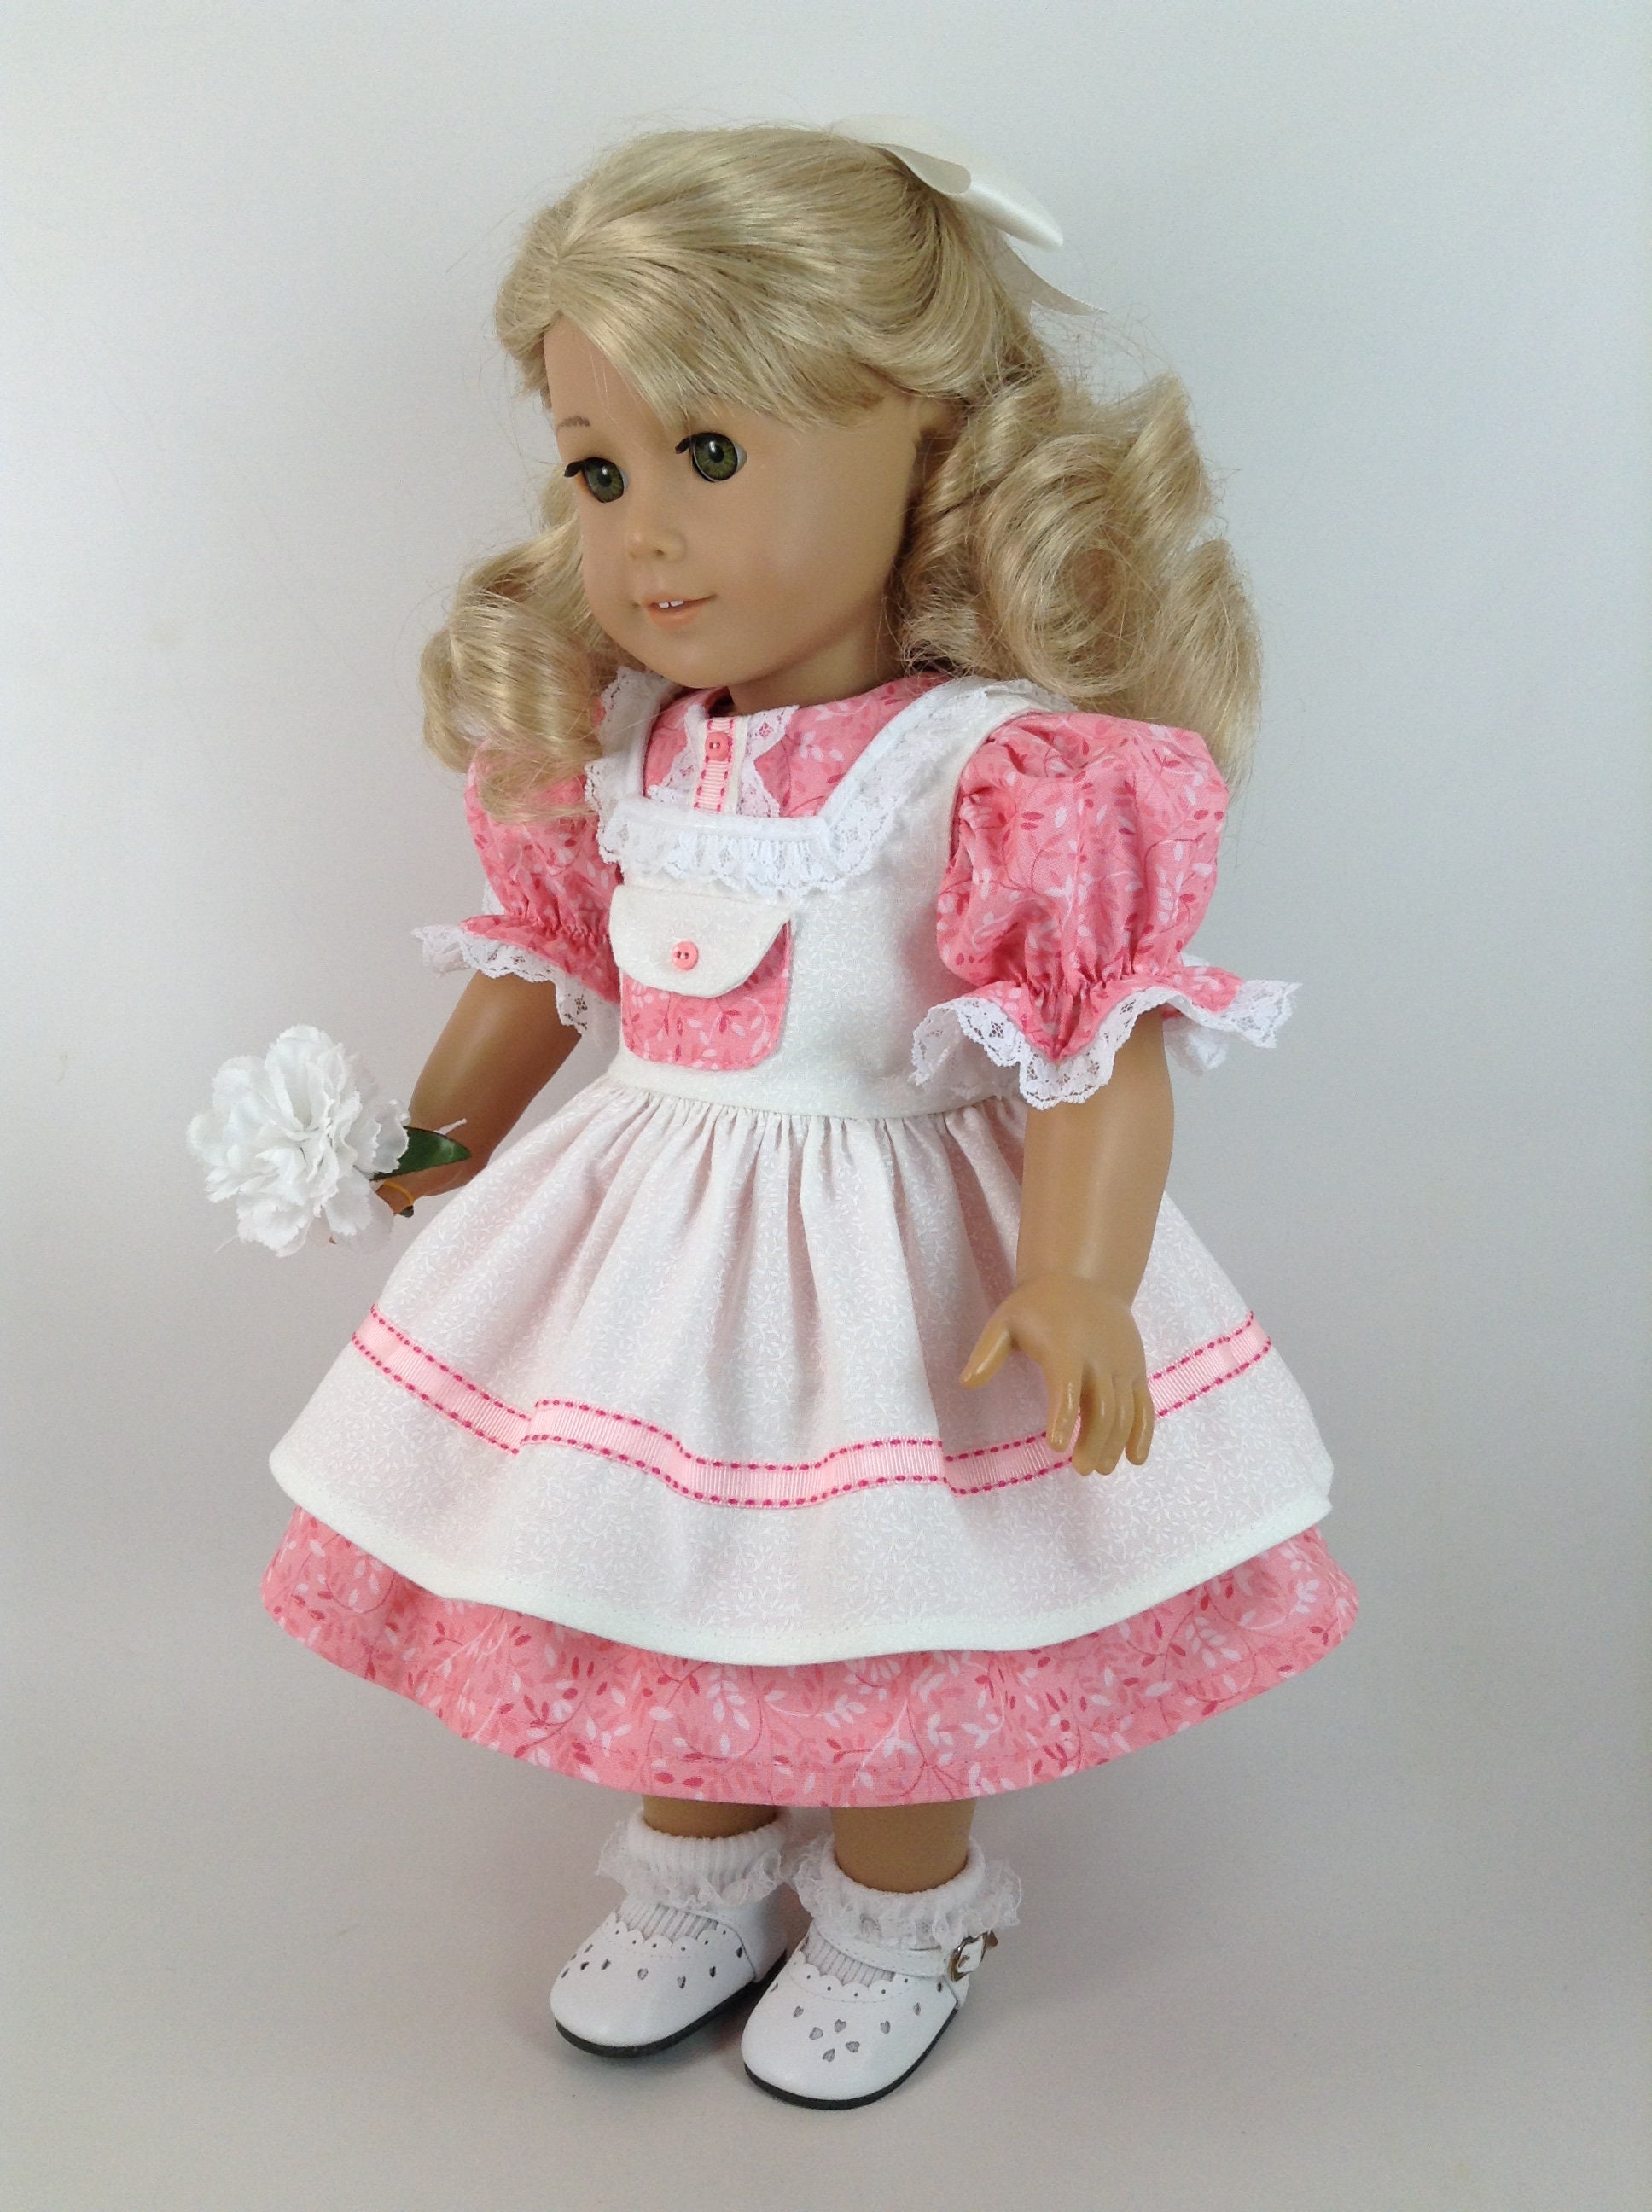 Vintage Dress in Pink Pinafore & Petticoat for American Girl | Etsy